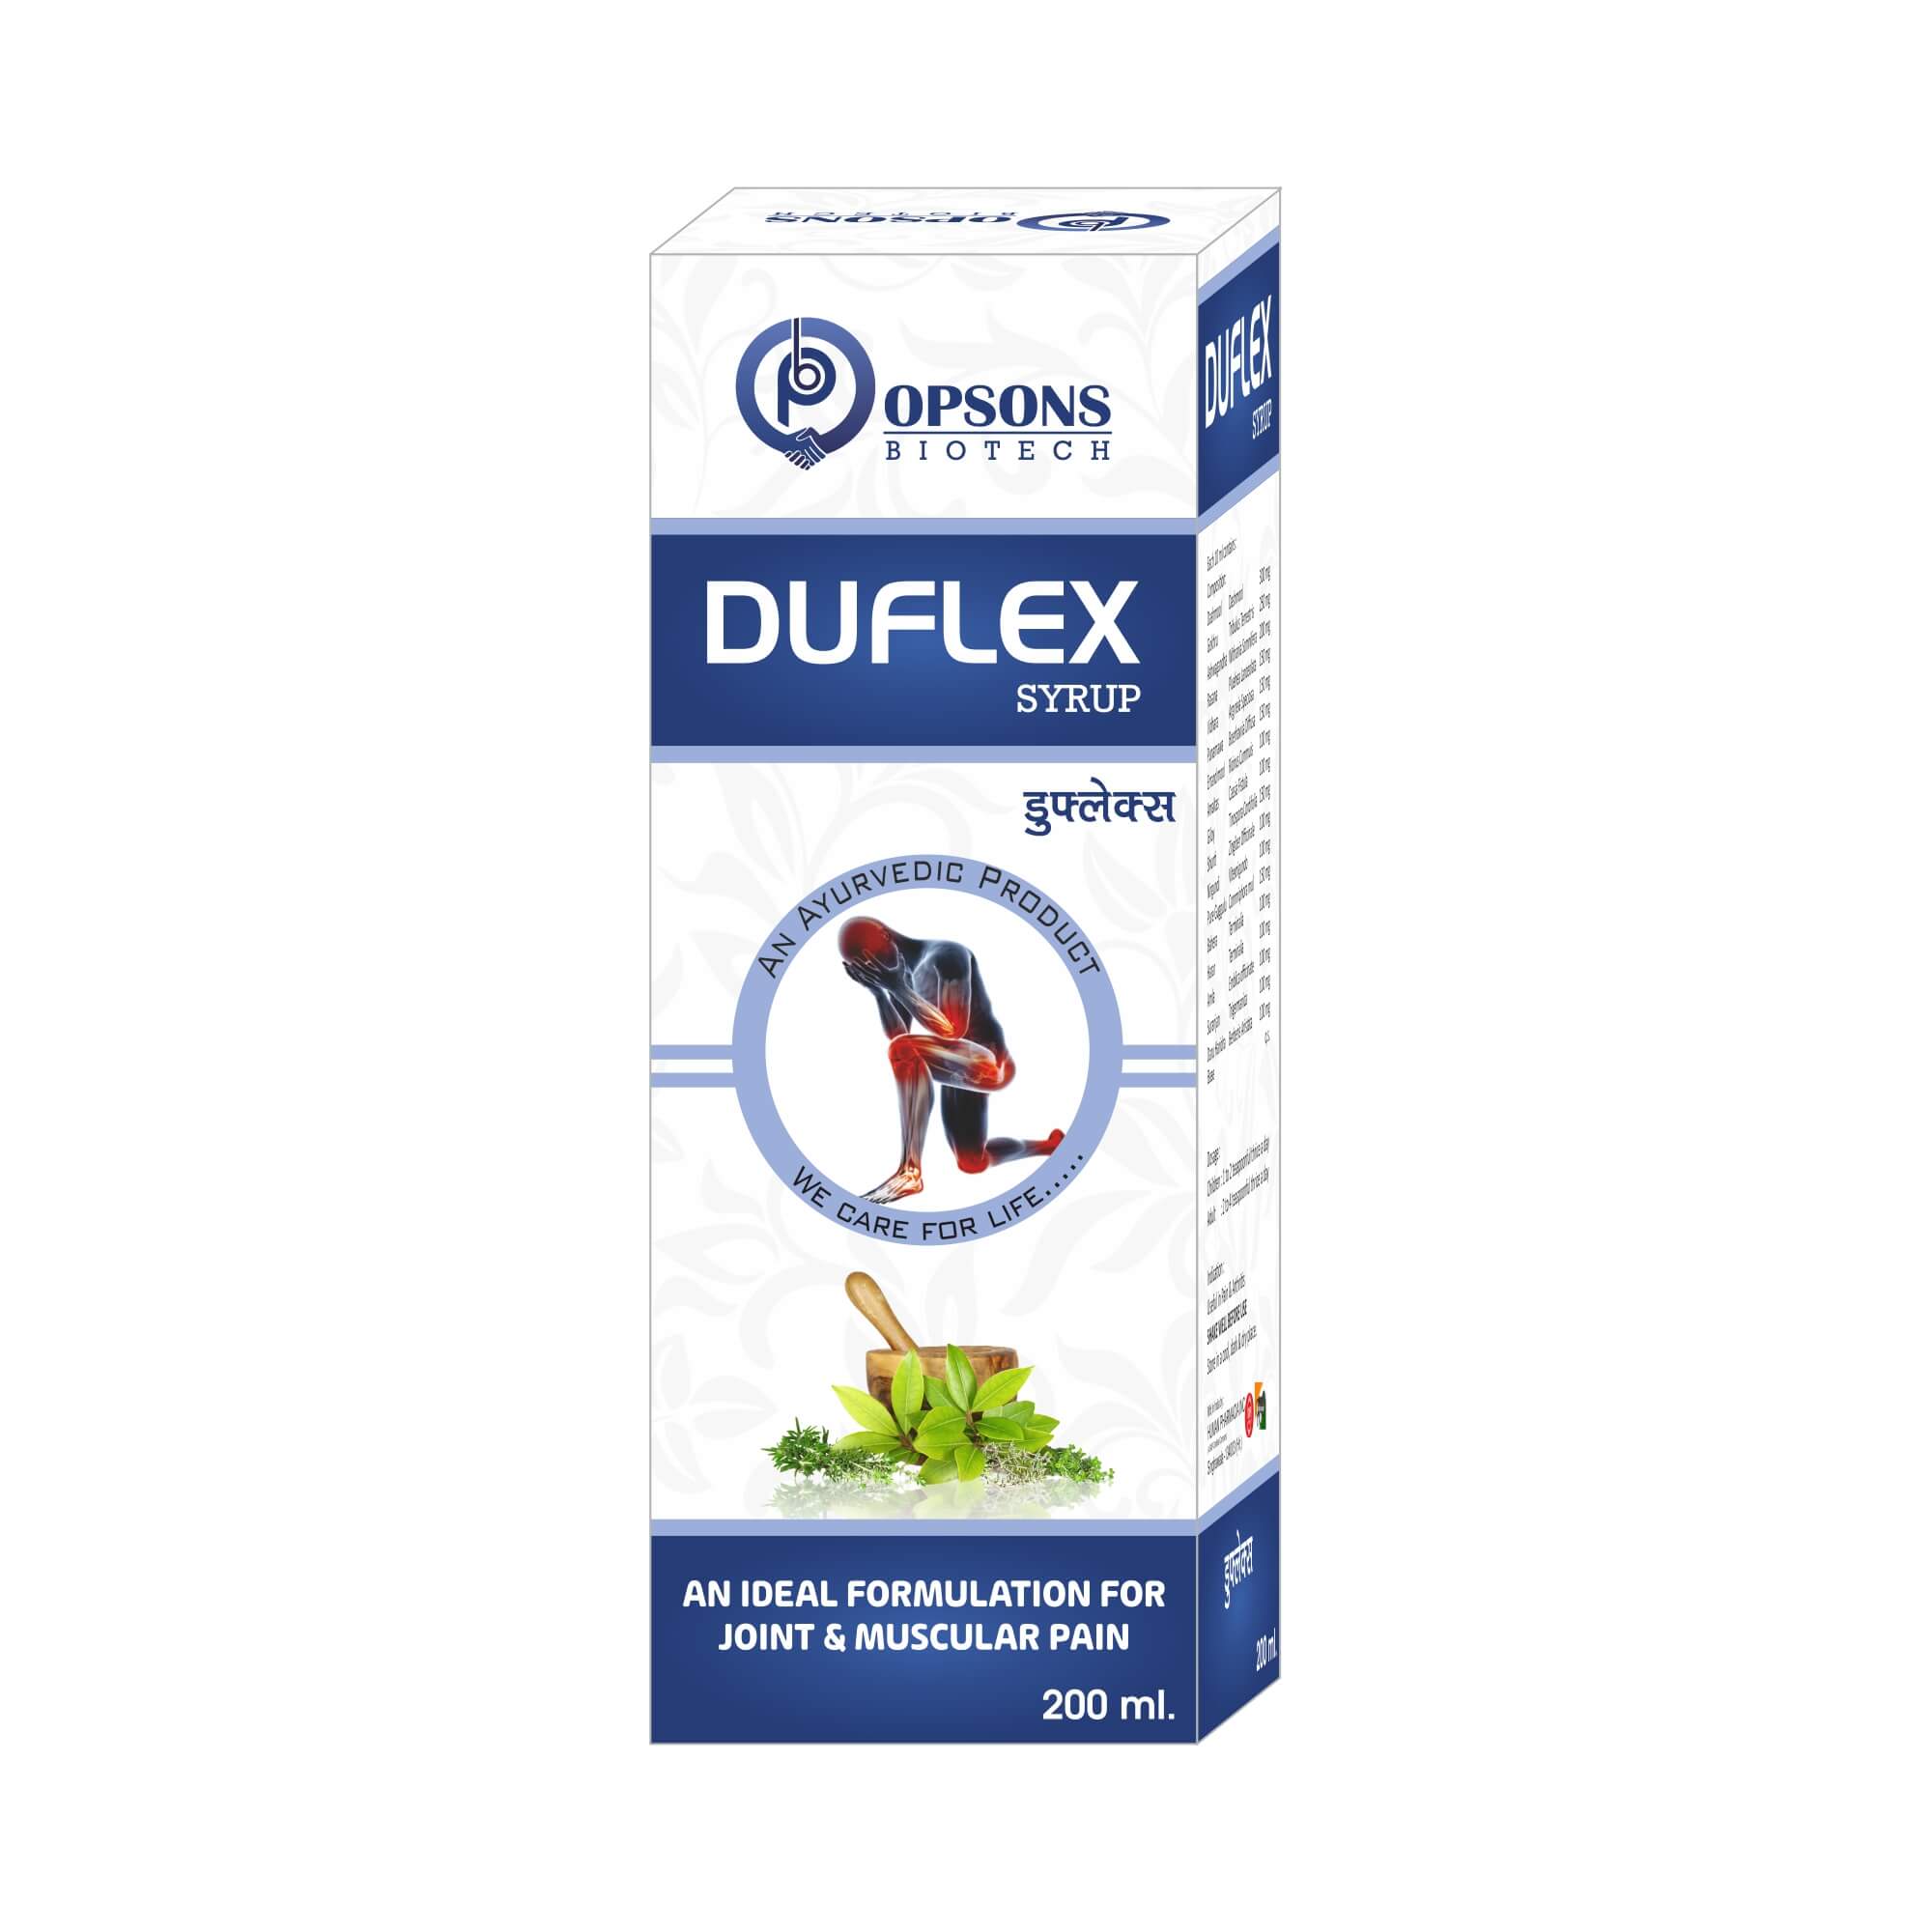 Product Name: Duflex, Compositions of An ideal Formulation For Joint & Muscular Pain are An ideal Formulation For Joint & Muscular Pain - Opsons Biotech